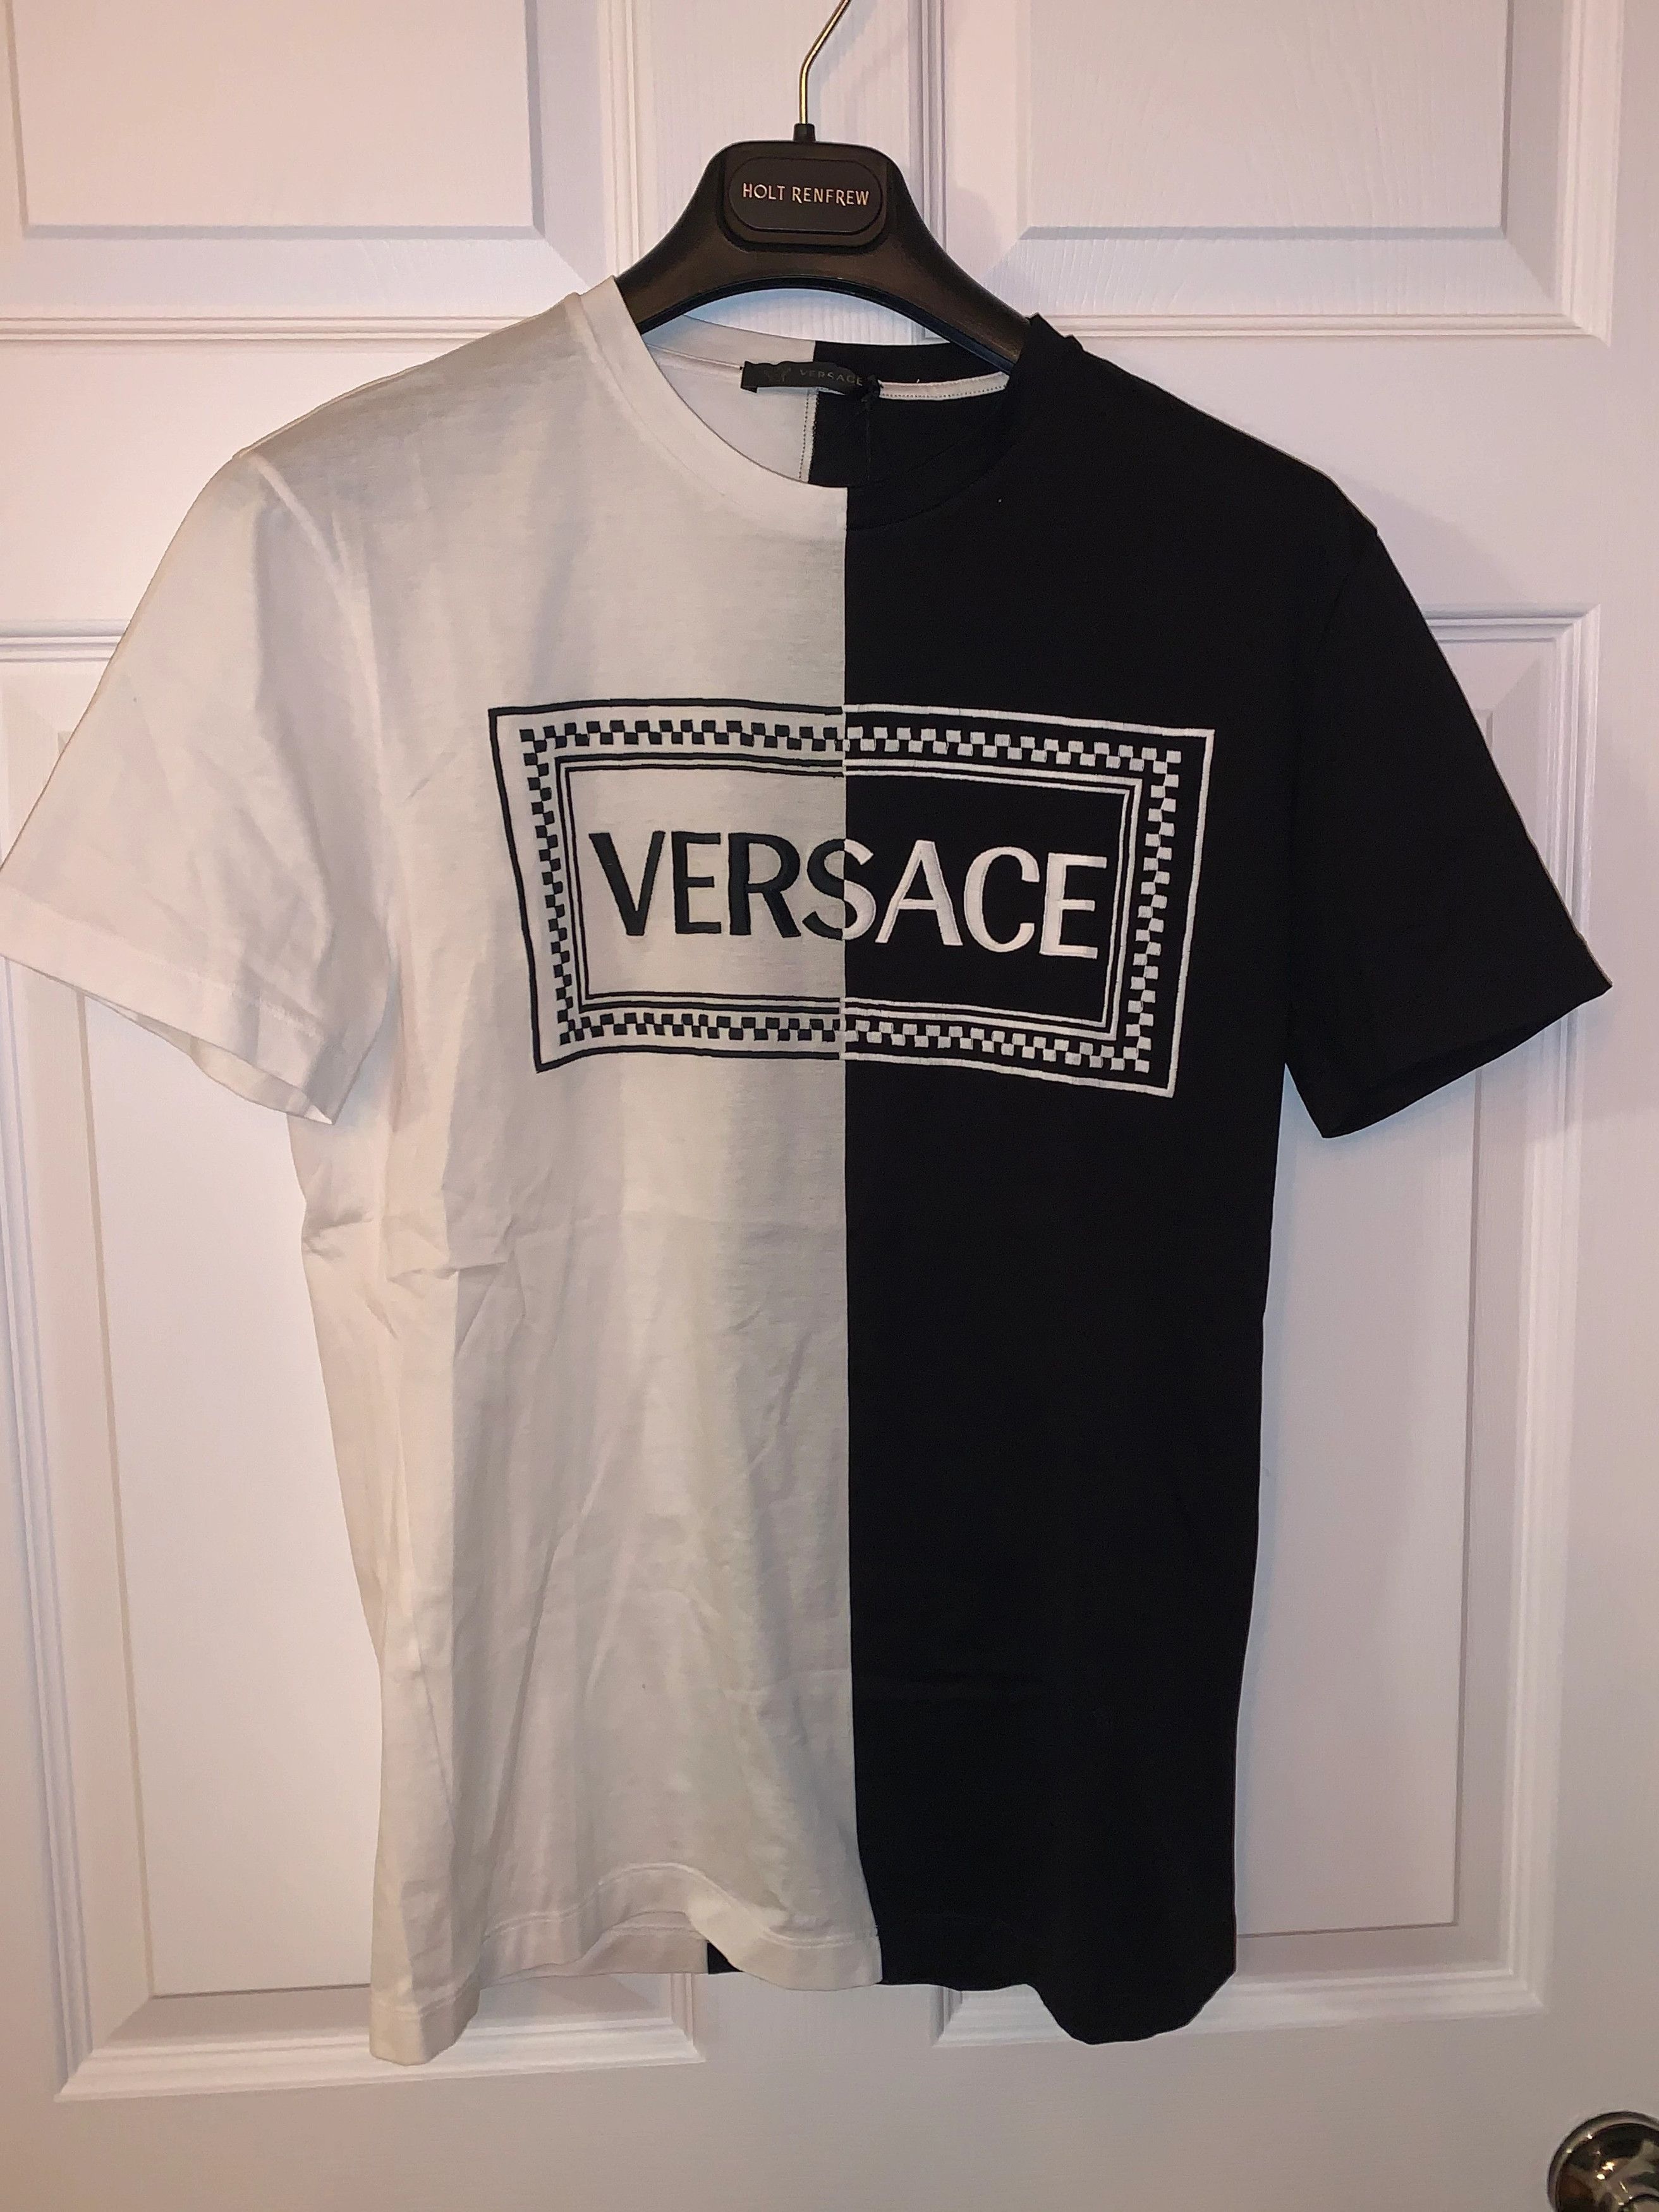 Versace VERSACE EMBROIDERED CHECKERED LOGO SHIRT XS $700+ | Grailed